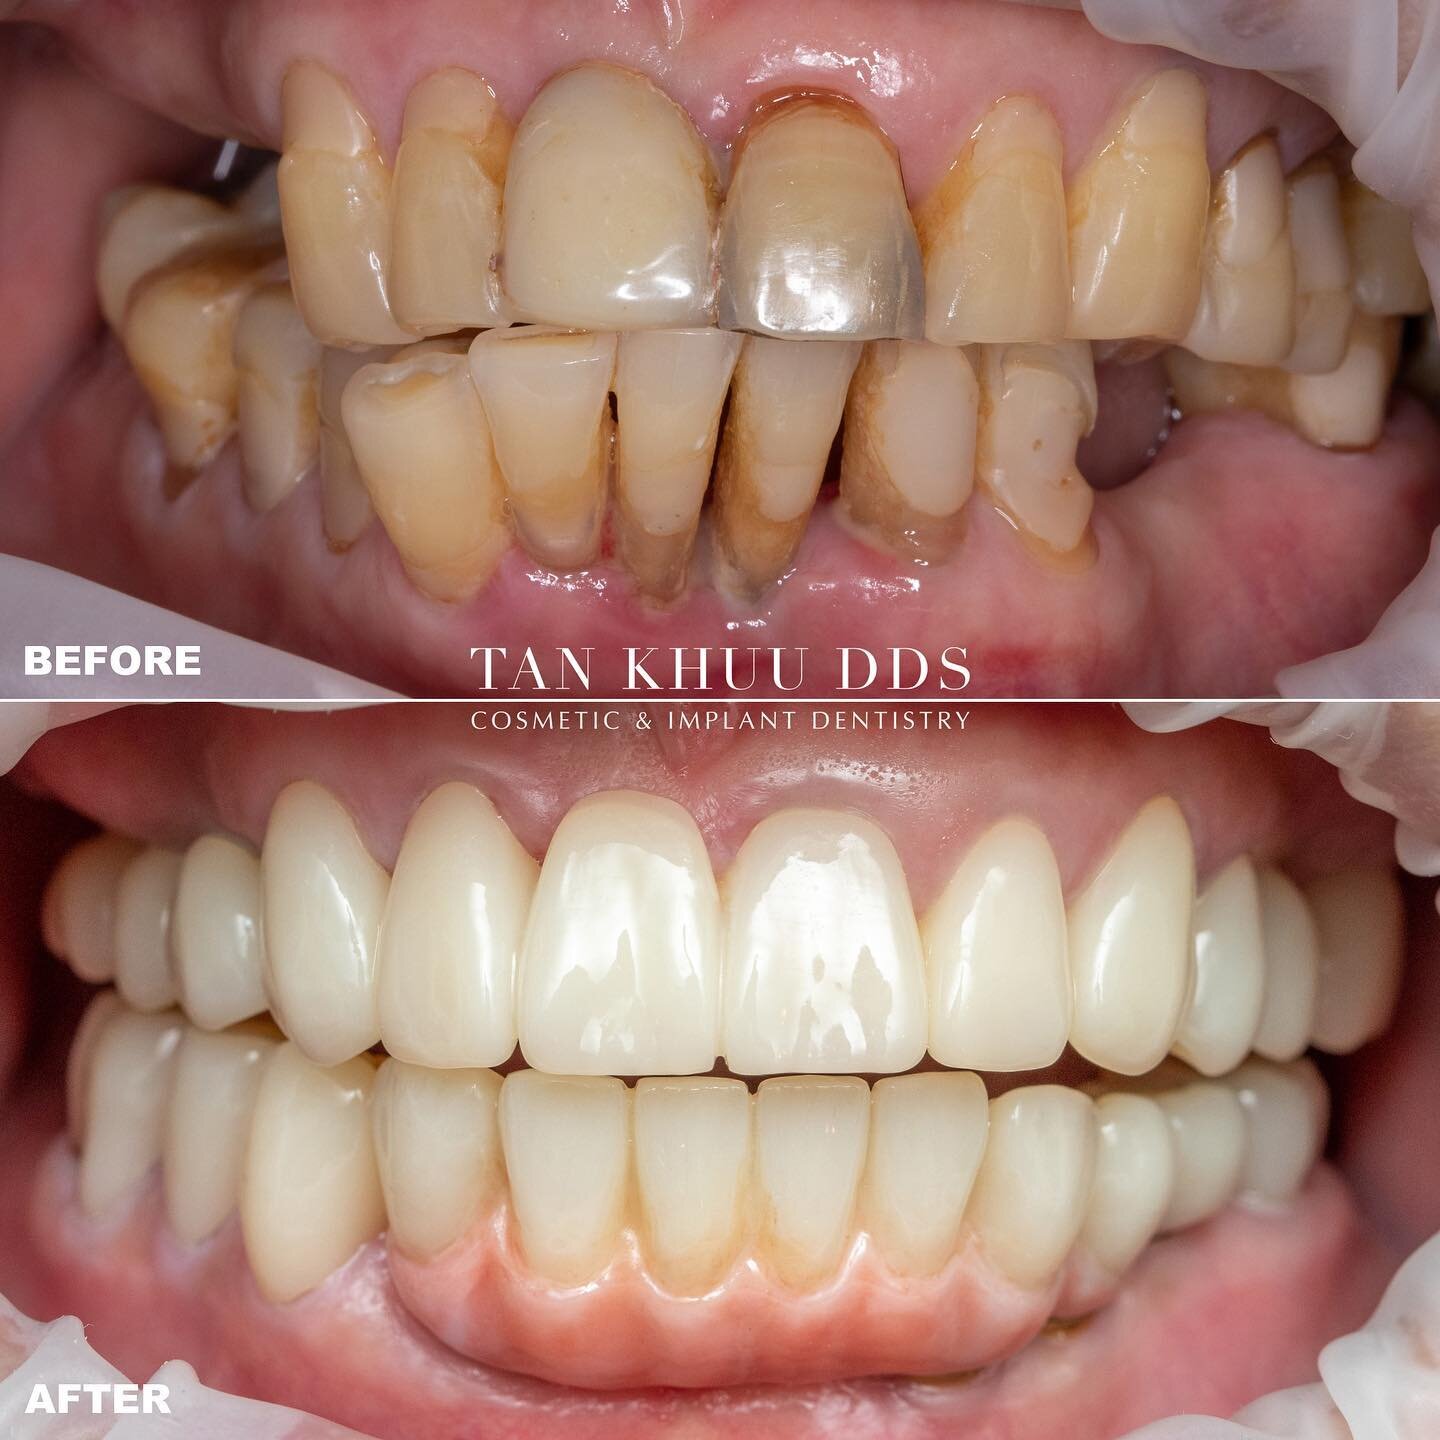 This patient was unable to eat comfortably for nearly 40 years. He came to us with teeth that were in poor condition due to infection and recurring decay. Aside from not being able to eat, he was very unhappy with how his smile looked.

His children 